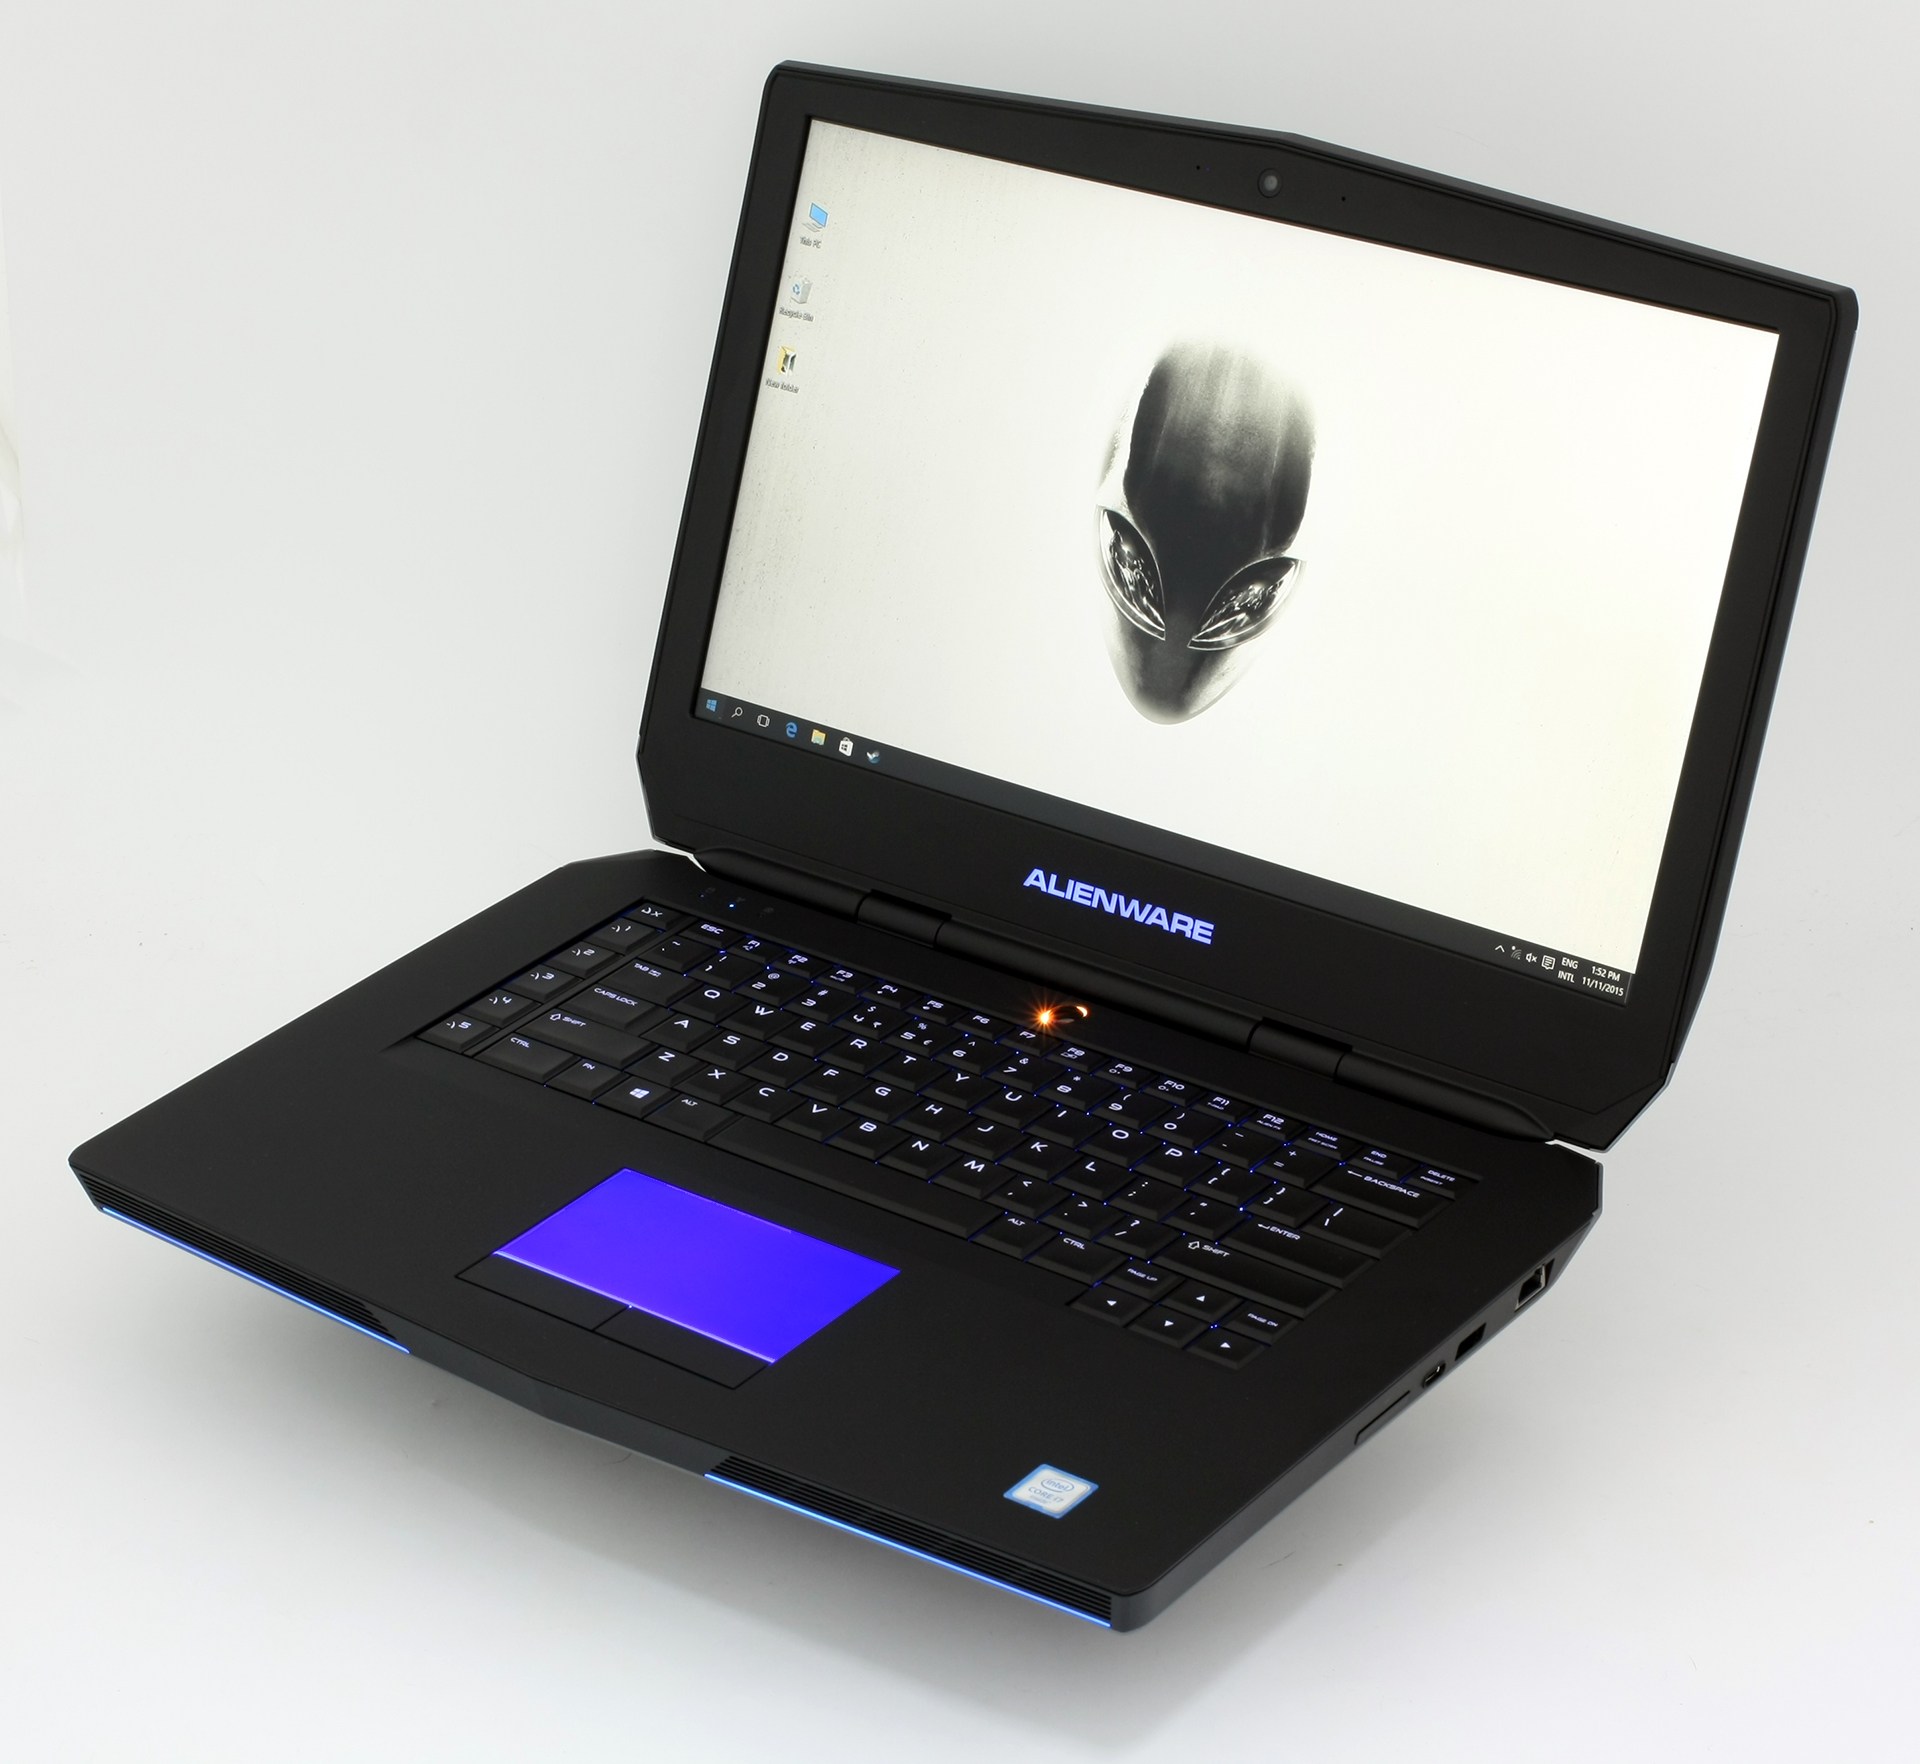 Recertified Dell Alienware 15 R2 15.6-Inch FHD Gaming Laptop ( Intel Core i7-6700HQ 2.6Ghz, 16GB RAM, 500GB HD, NVIDIA GeForce GTX 970M 3GB, Windows 10 Home ) Grade A - image 3 of 8